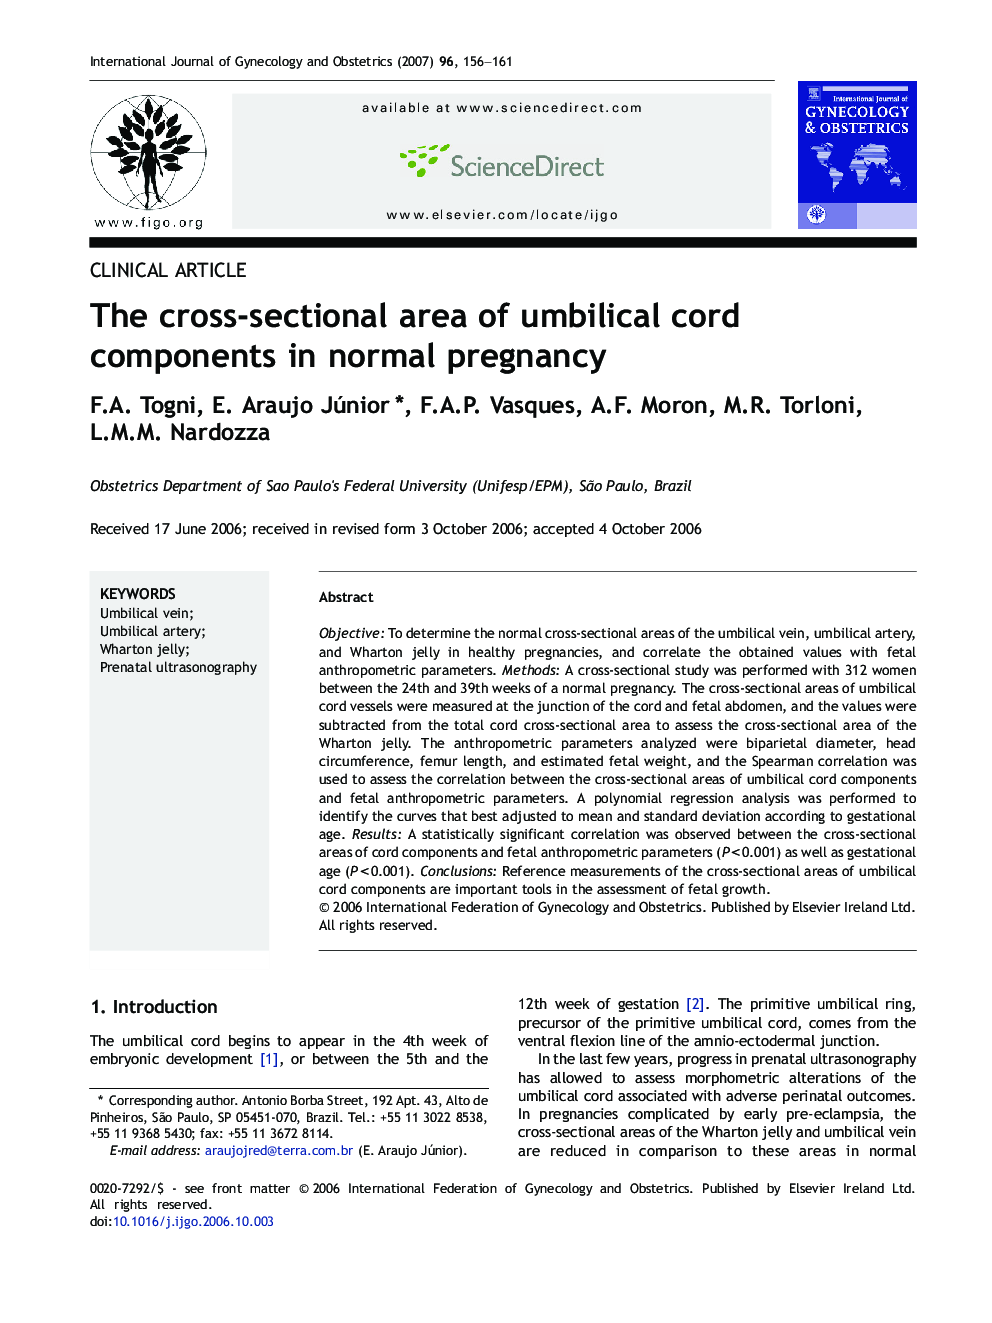 The cross-sectional area of umbilical cord components in normal pregnancy